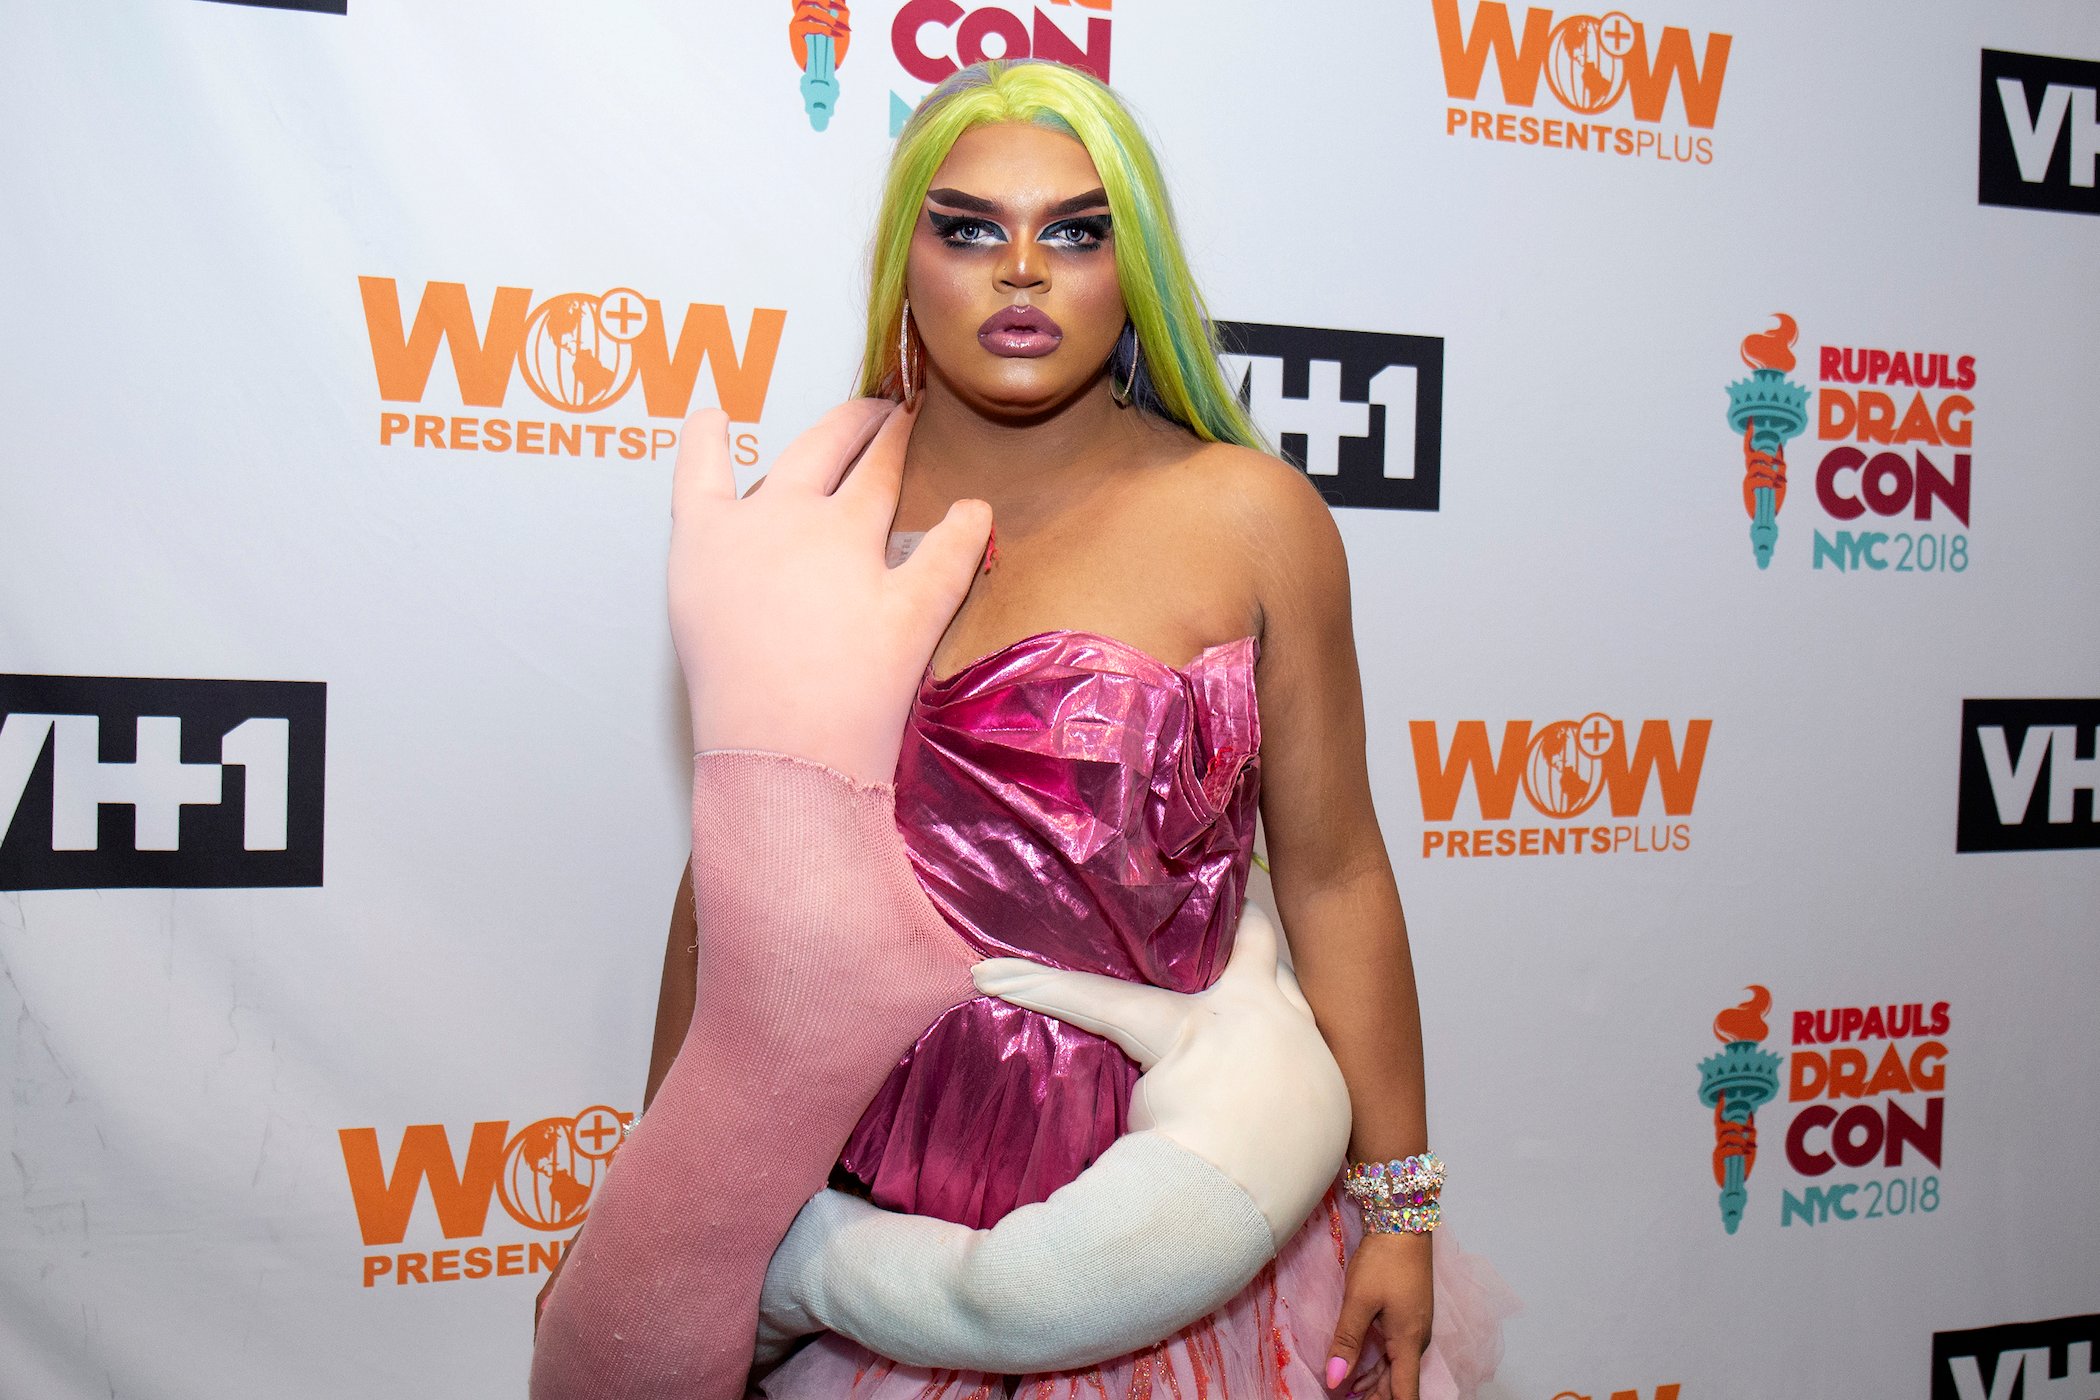 Kandy Muse attends 'RuPaul's DragCon NYC' 2018 at Javits Center